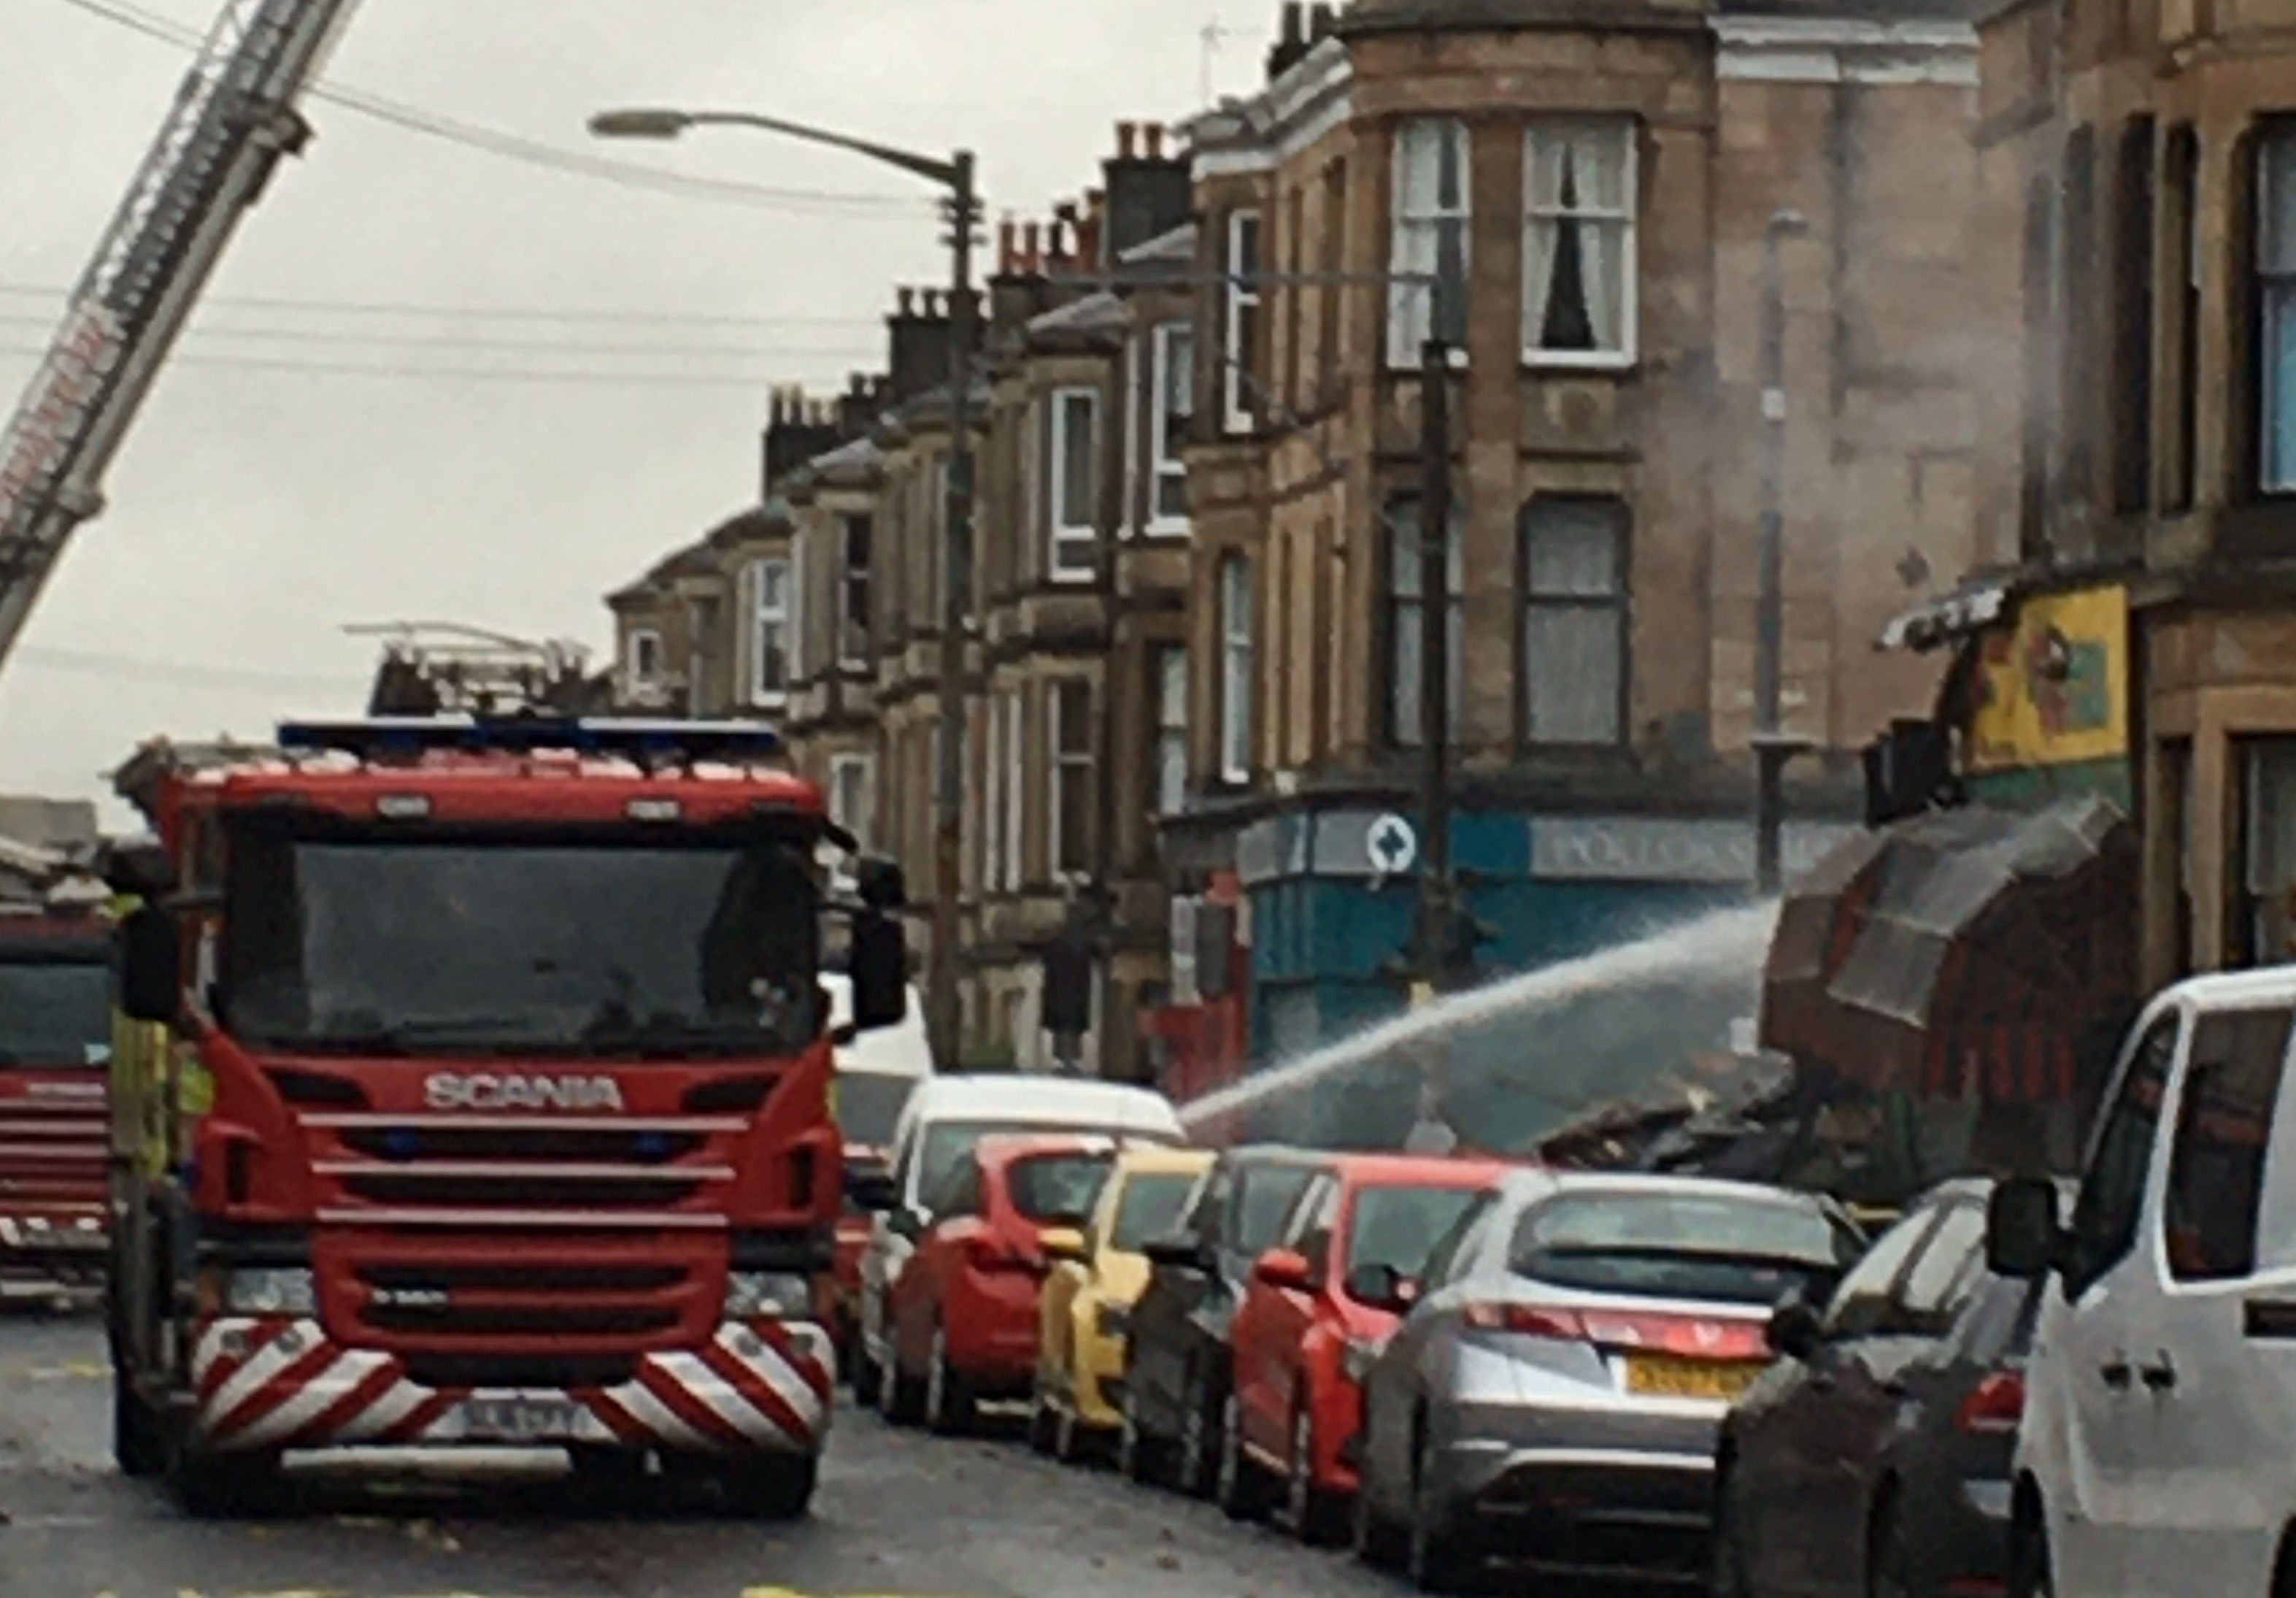 Firefighters were still at the scene on Tuesday afternoon carrying out an “extensive dampening down operation”